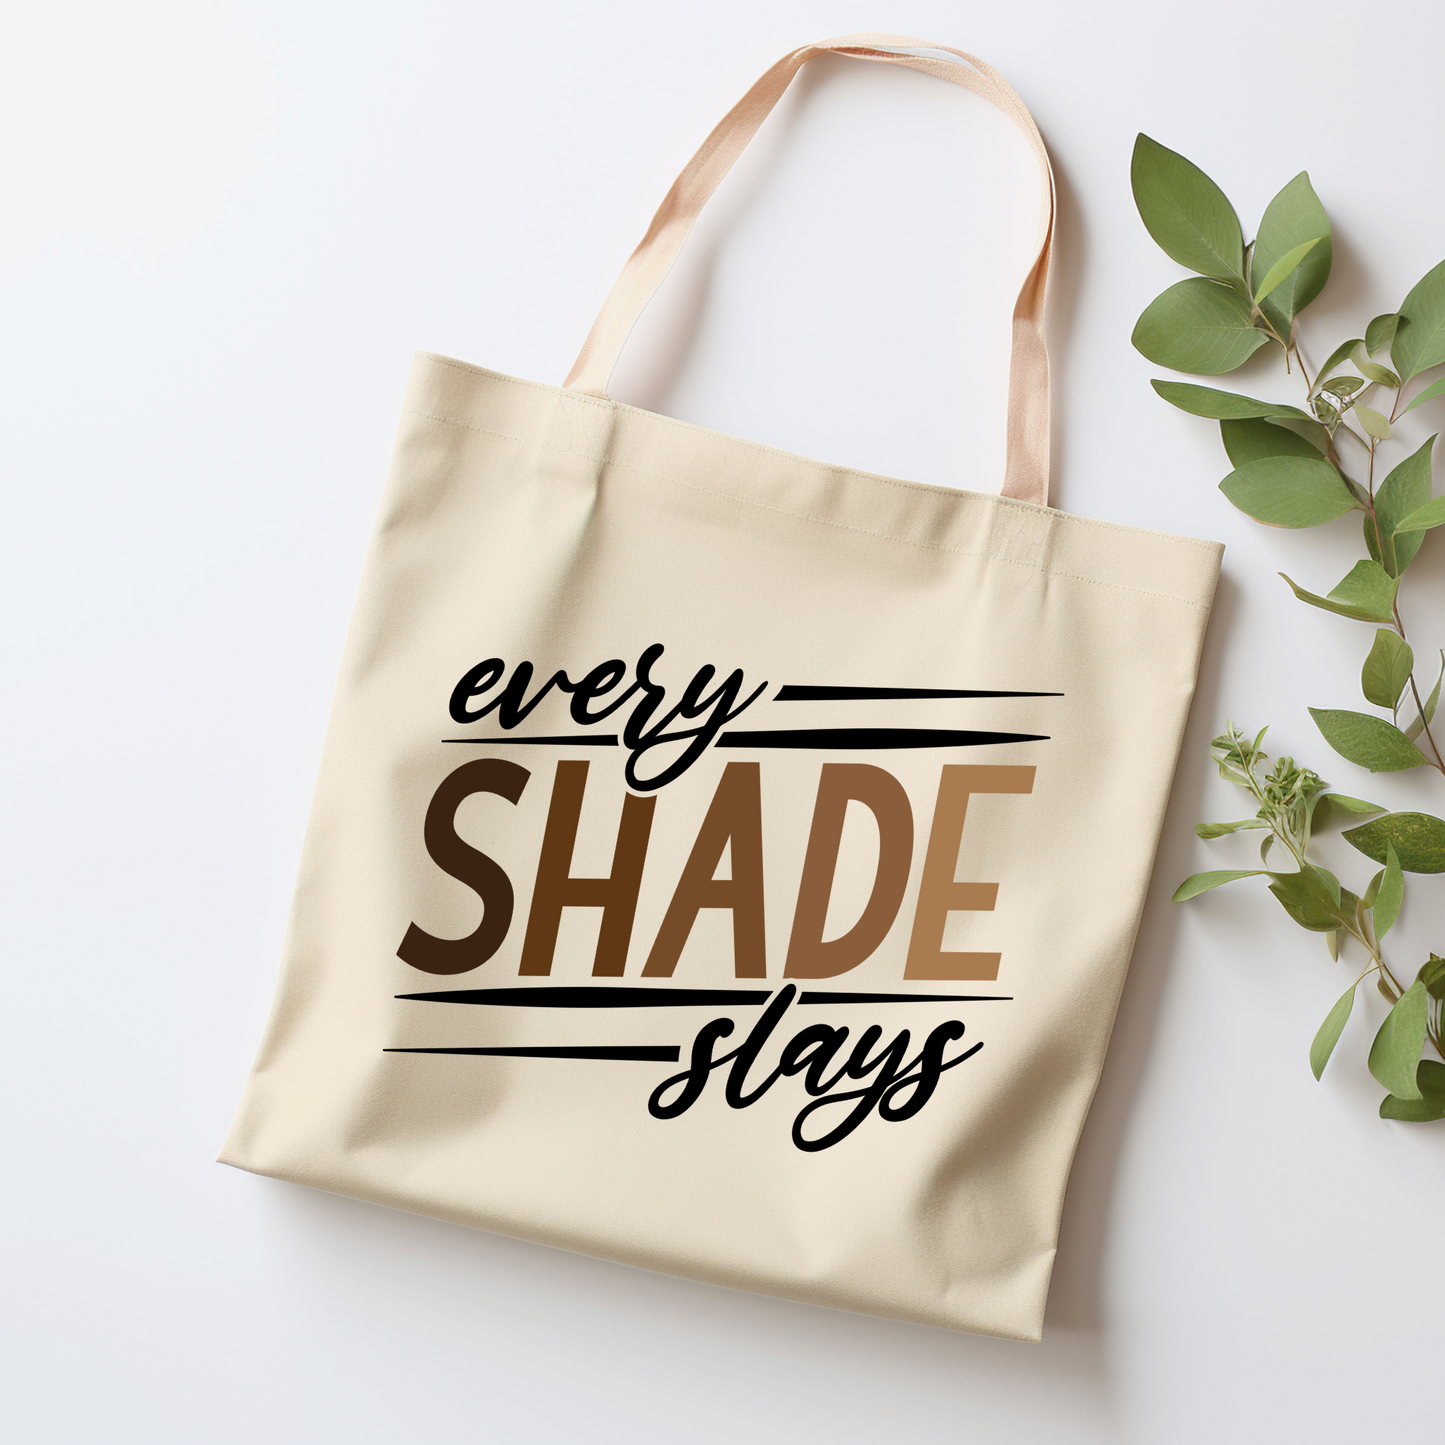 Every Shade Slays Large Canvas Tote Bag